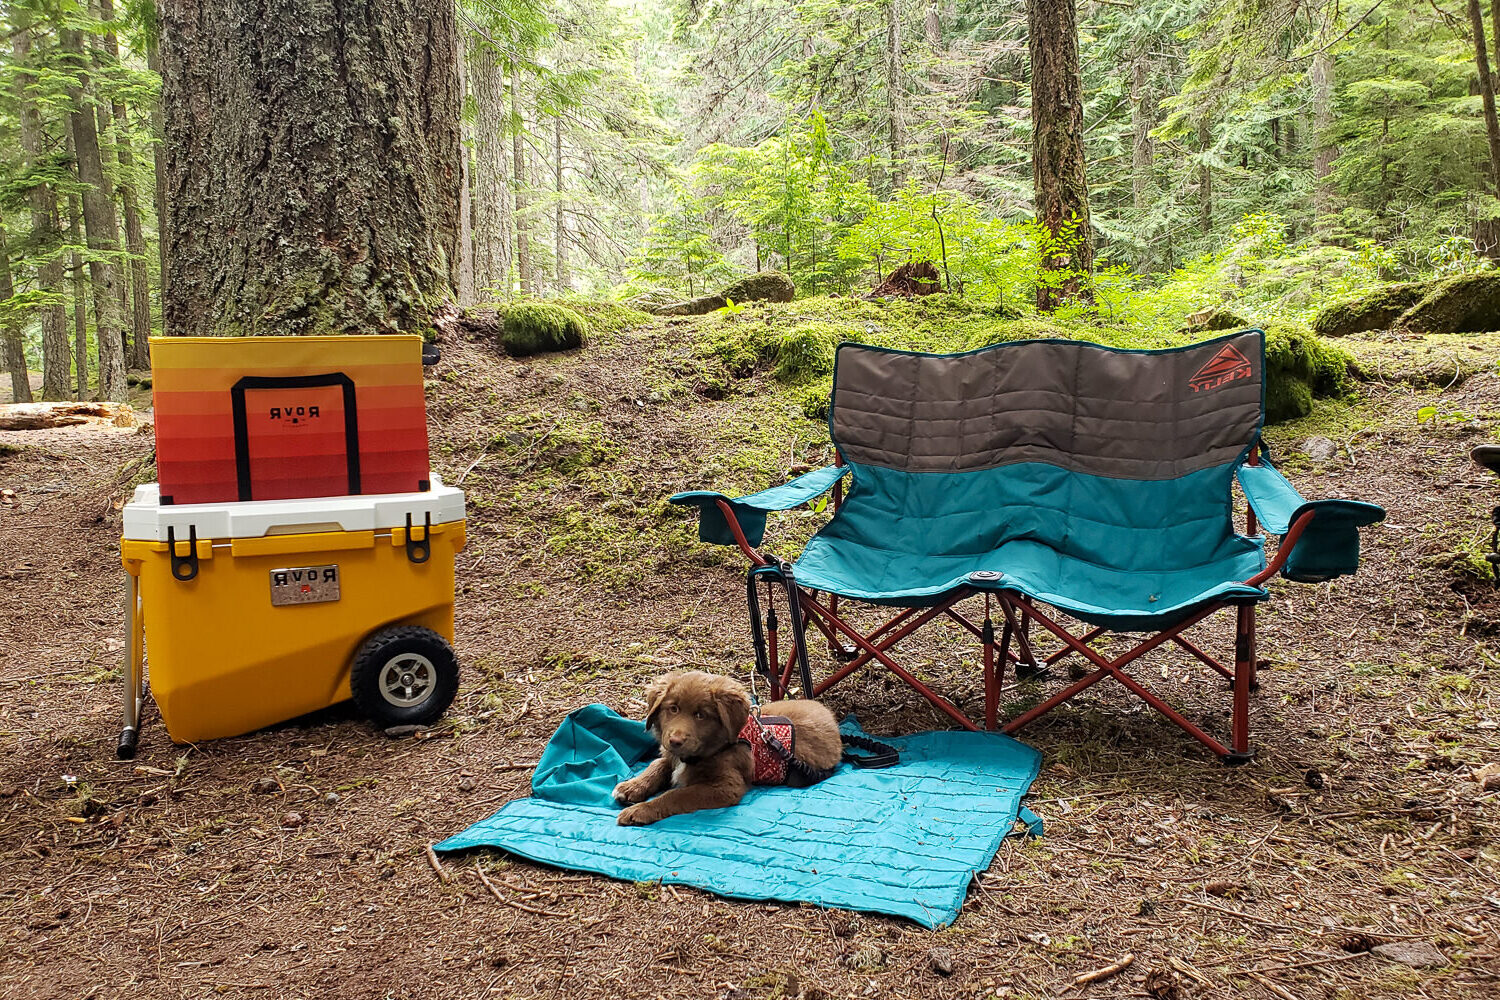 The Rovr Rollr 60 Cooler In A Campsite With A Camp Chair And A Puppy On A Mat E1700030073680 